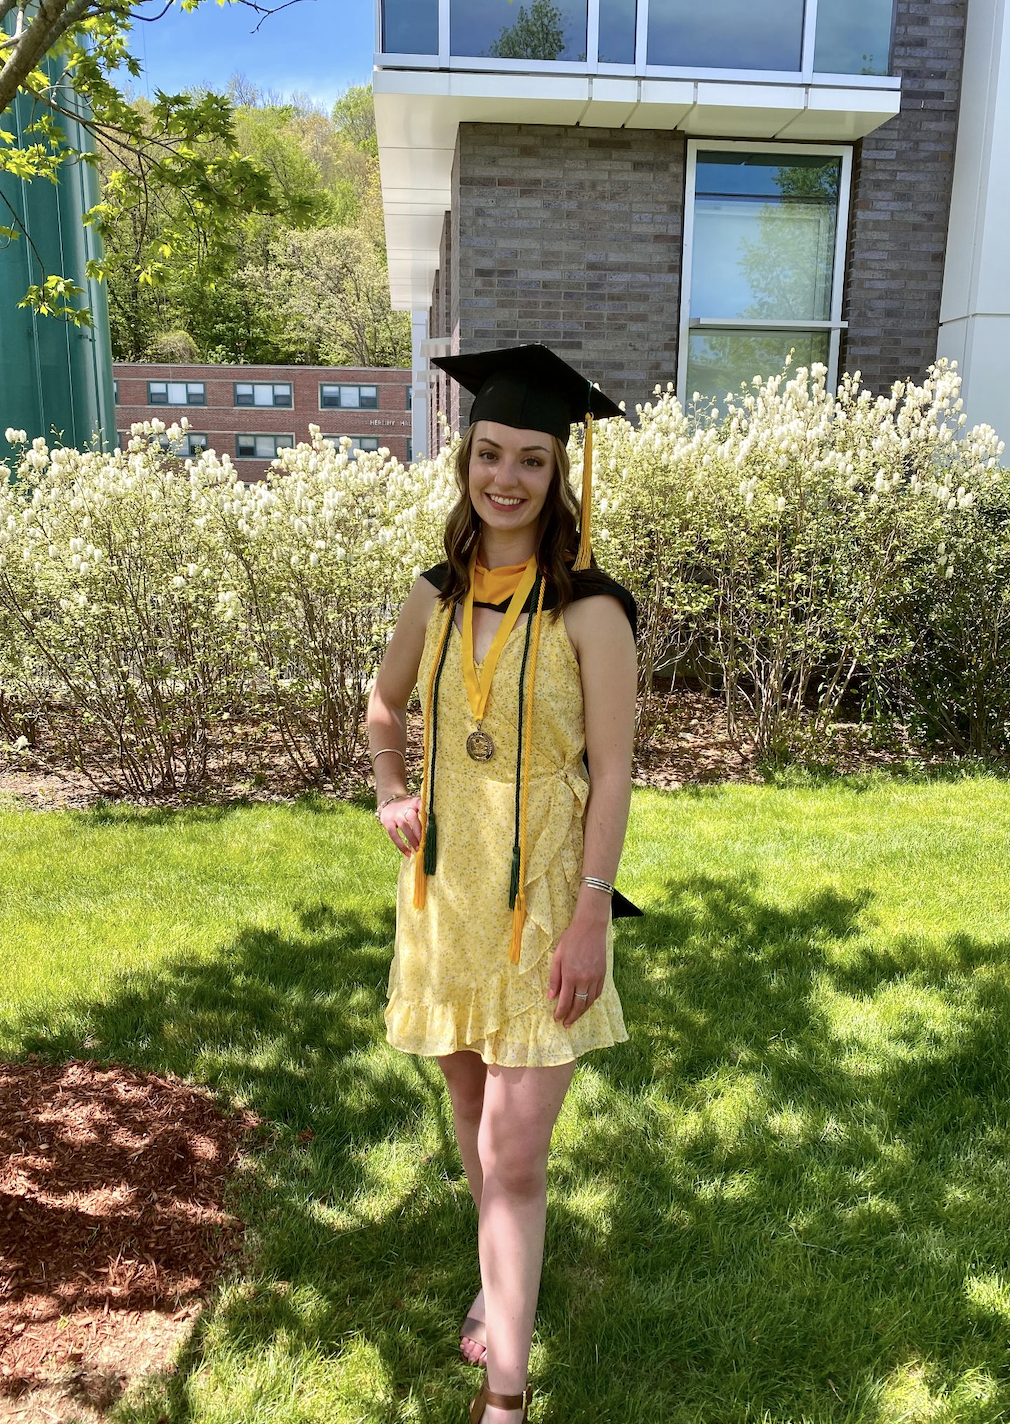 Recent Exercise and Sports Science graduate is soaring into a physical therapy program at the University of New England this fall.